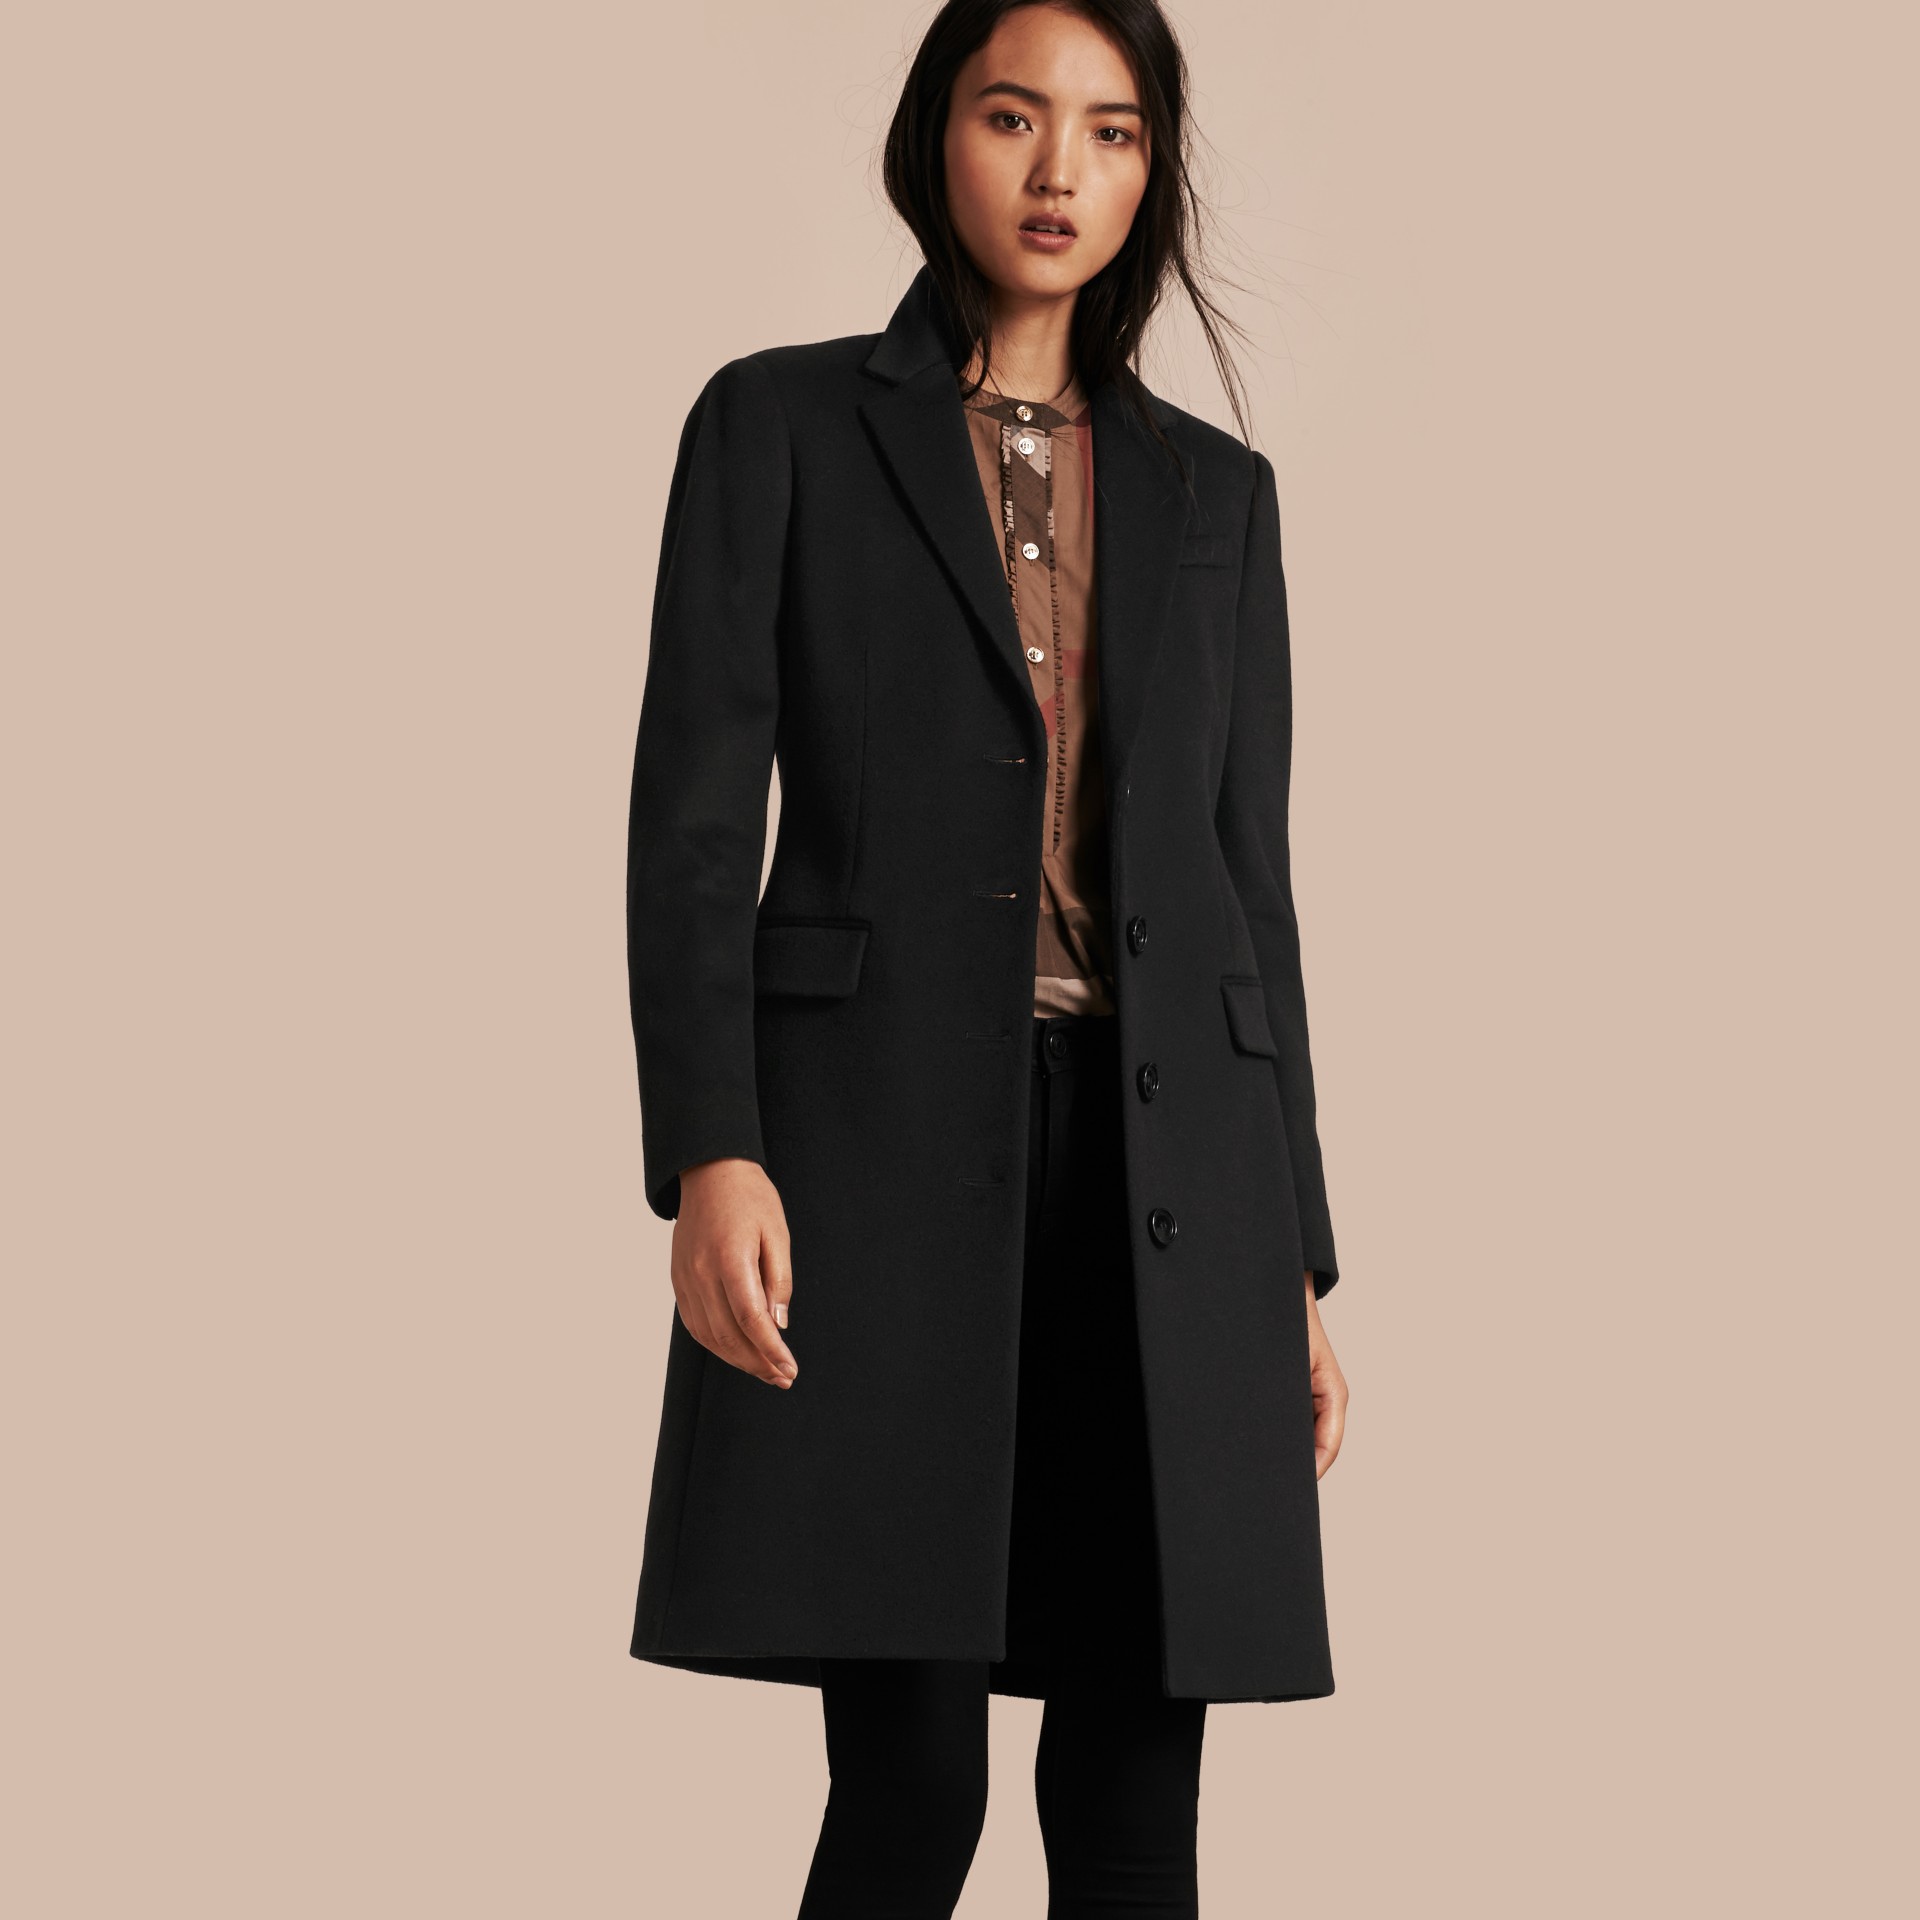 Tailored Wool Cashmere Coat in Black - Women | Burberry United States